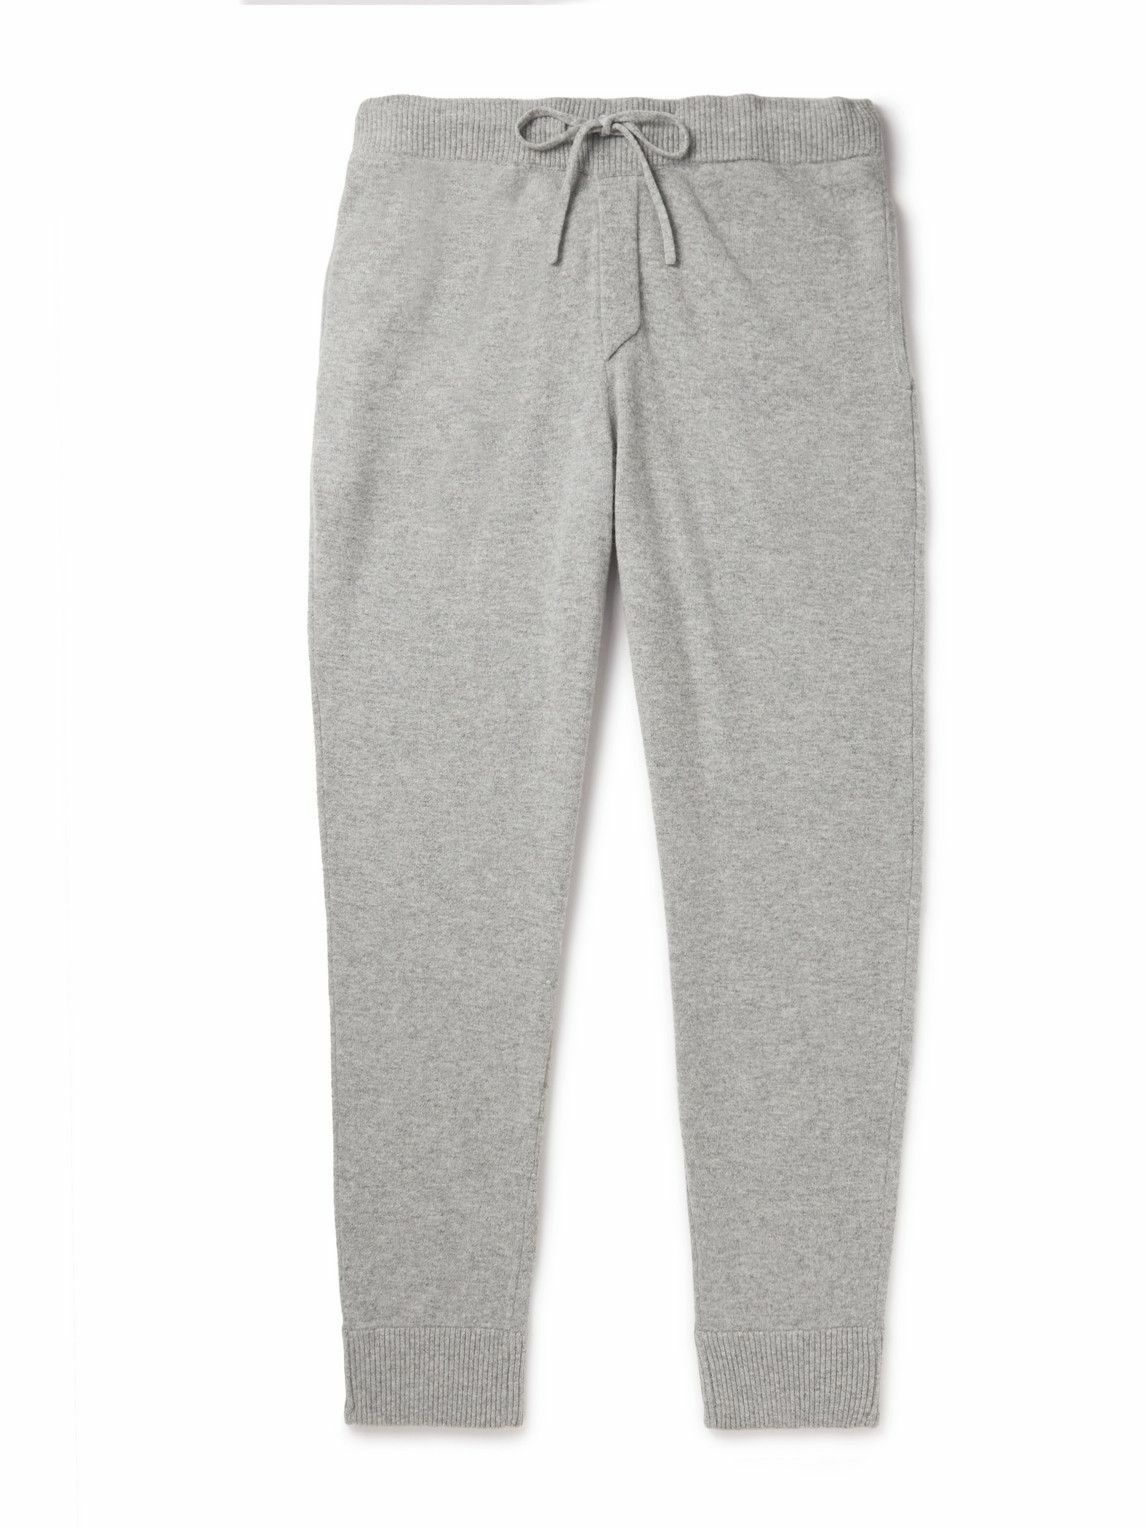 Photo: Onia - Tapered Cashmere Sweatpants - Gray